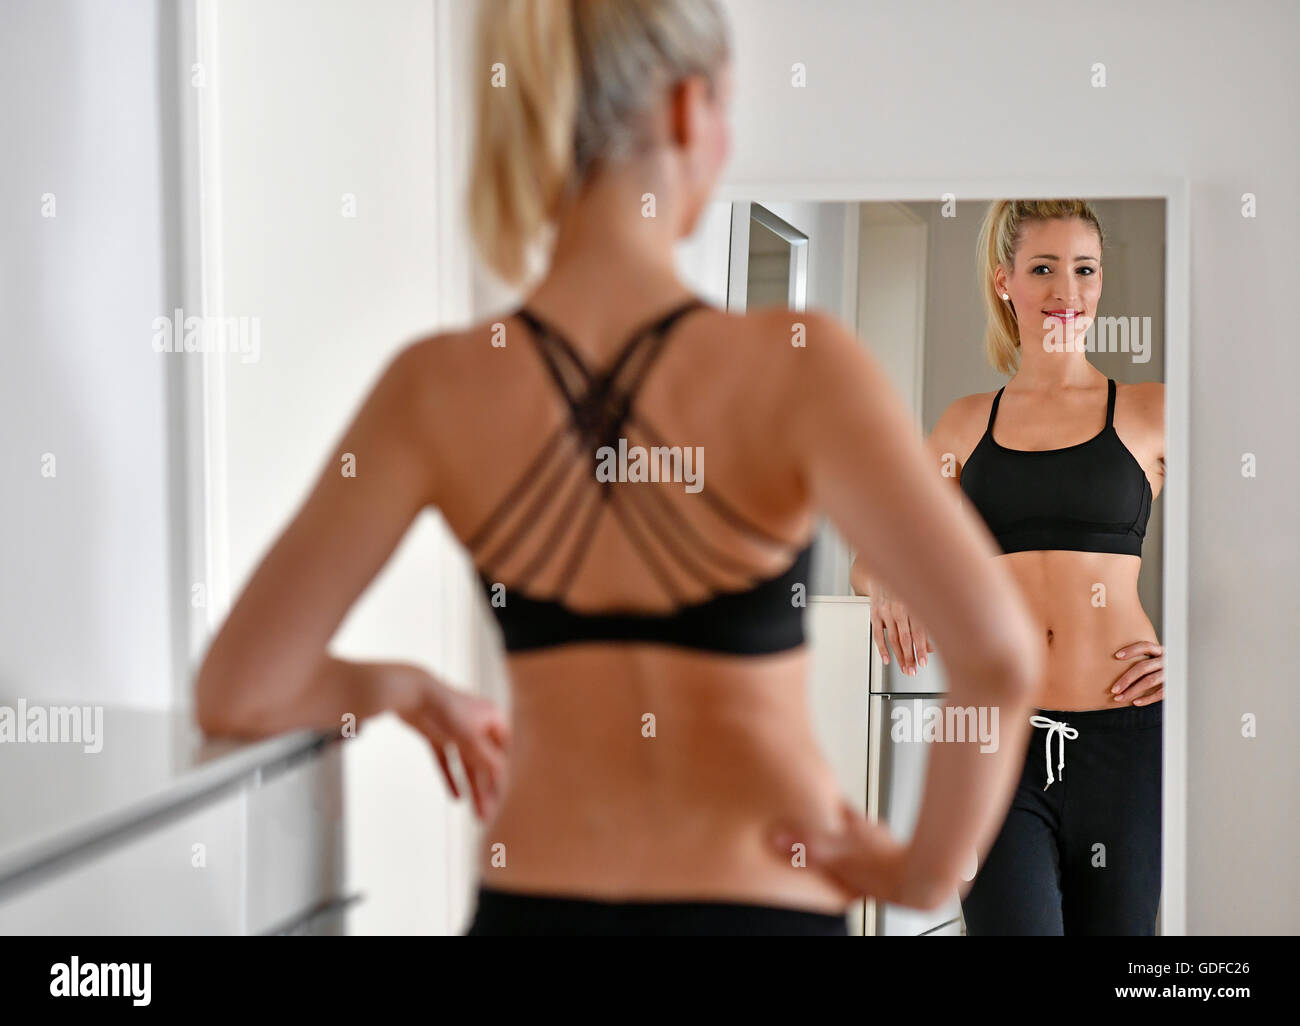 Young woman with sports bra and sweatpants looks at herself in the mirror Stock Photo